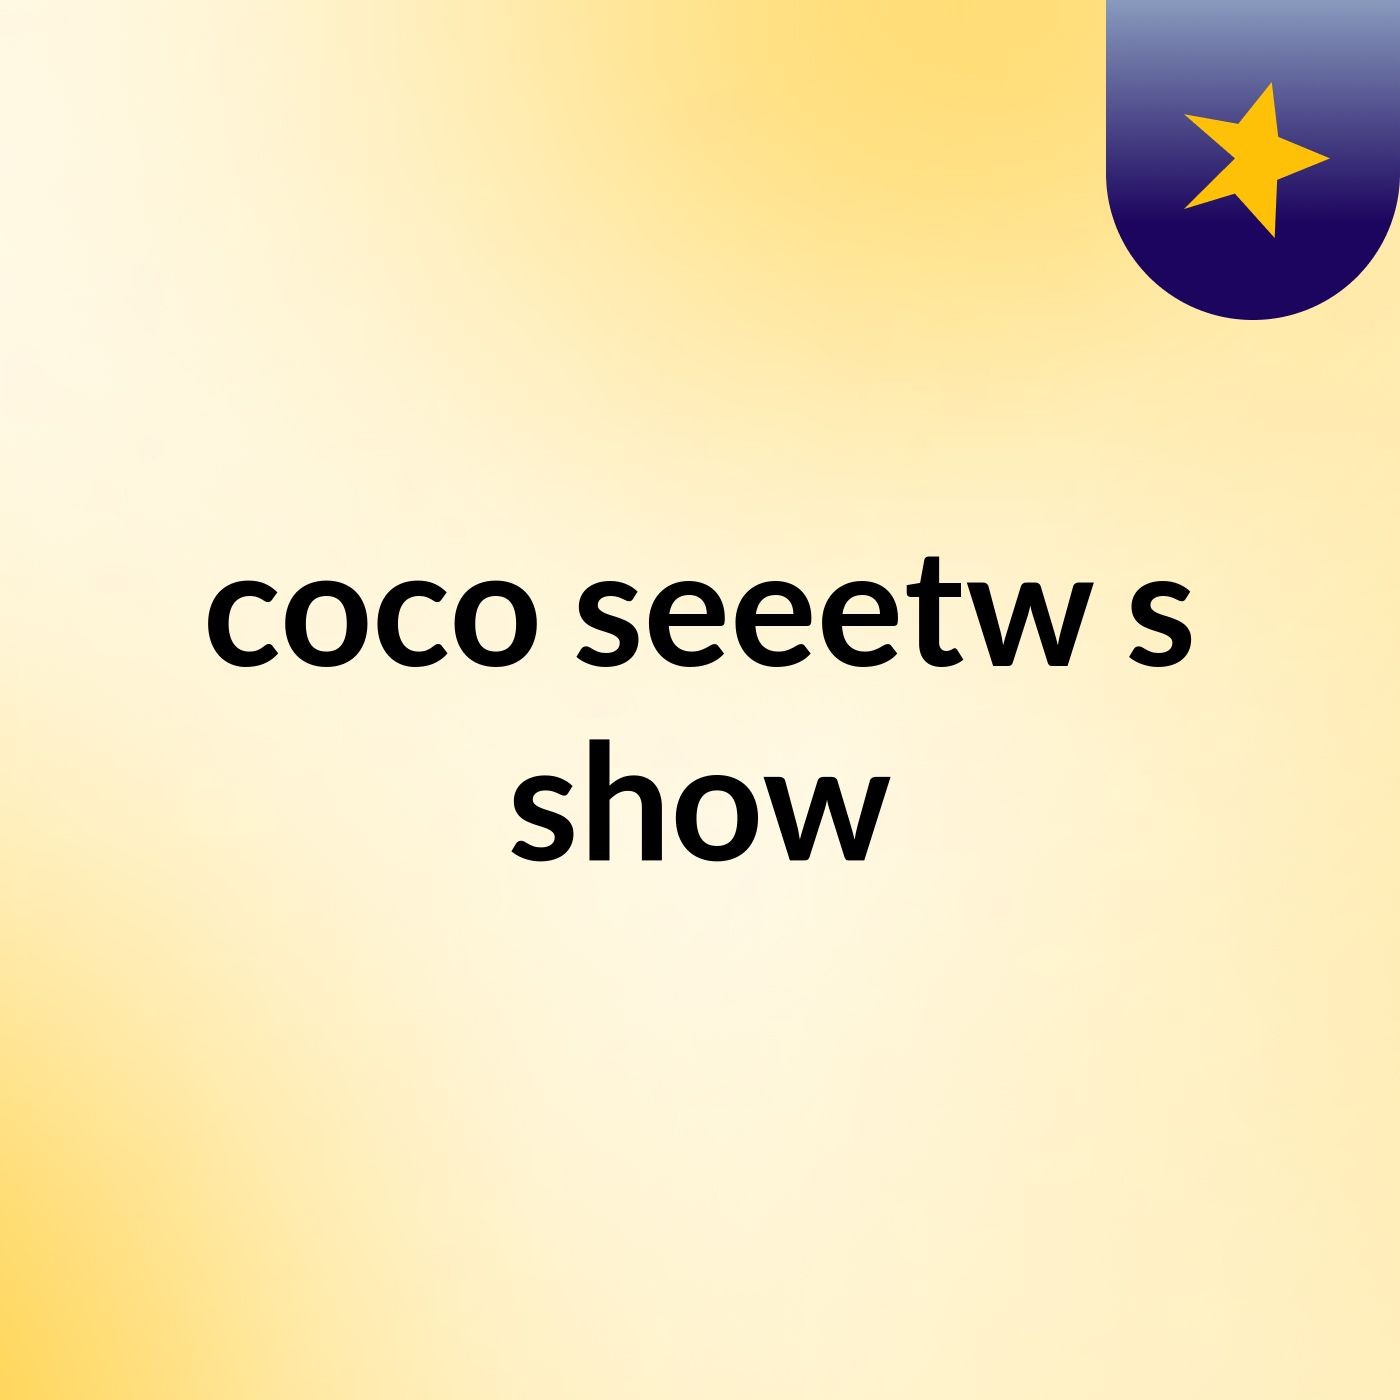 coco seeetw's show